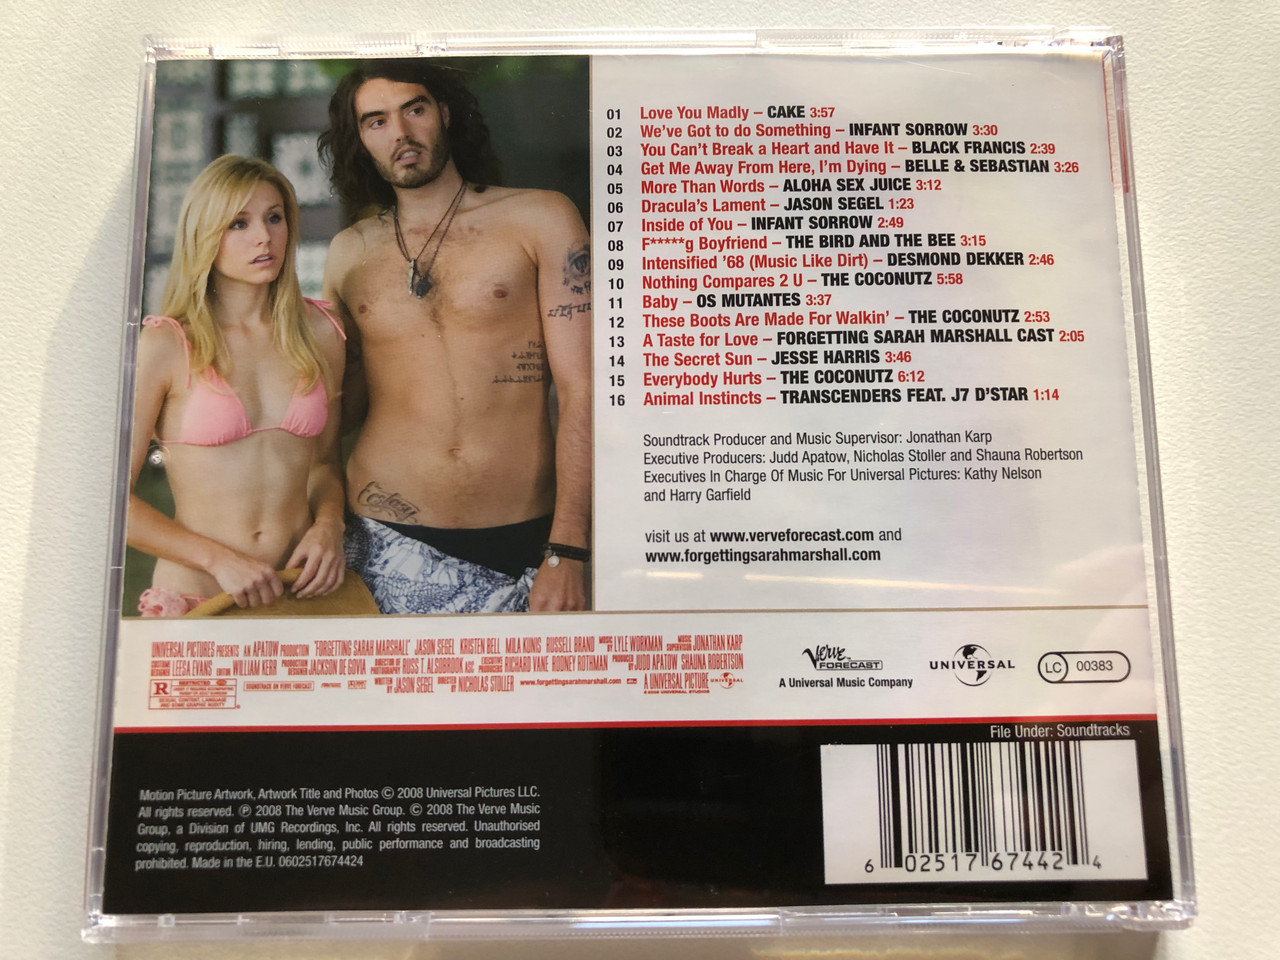 https://cdn11.bigcommerce.com/s-62bdpkt7pb/products/0/images/321041/Forgetting_Sarah_Marshall_Original_Motion_Picture_Soundtrack_-_From_The_Guys_Who_Bought_You_The_40-year-old_Virgin_And_Knocked_Up_-_Jeason_Segel_Kristen_Bell_Mila_Kunis_Russell___53346.1704874804.1280.1280.JPG?c=2